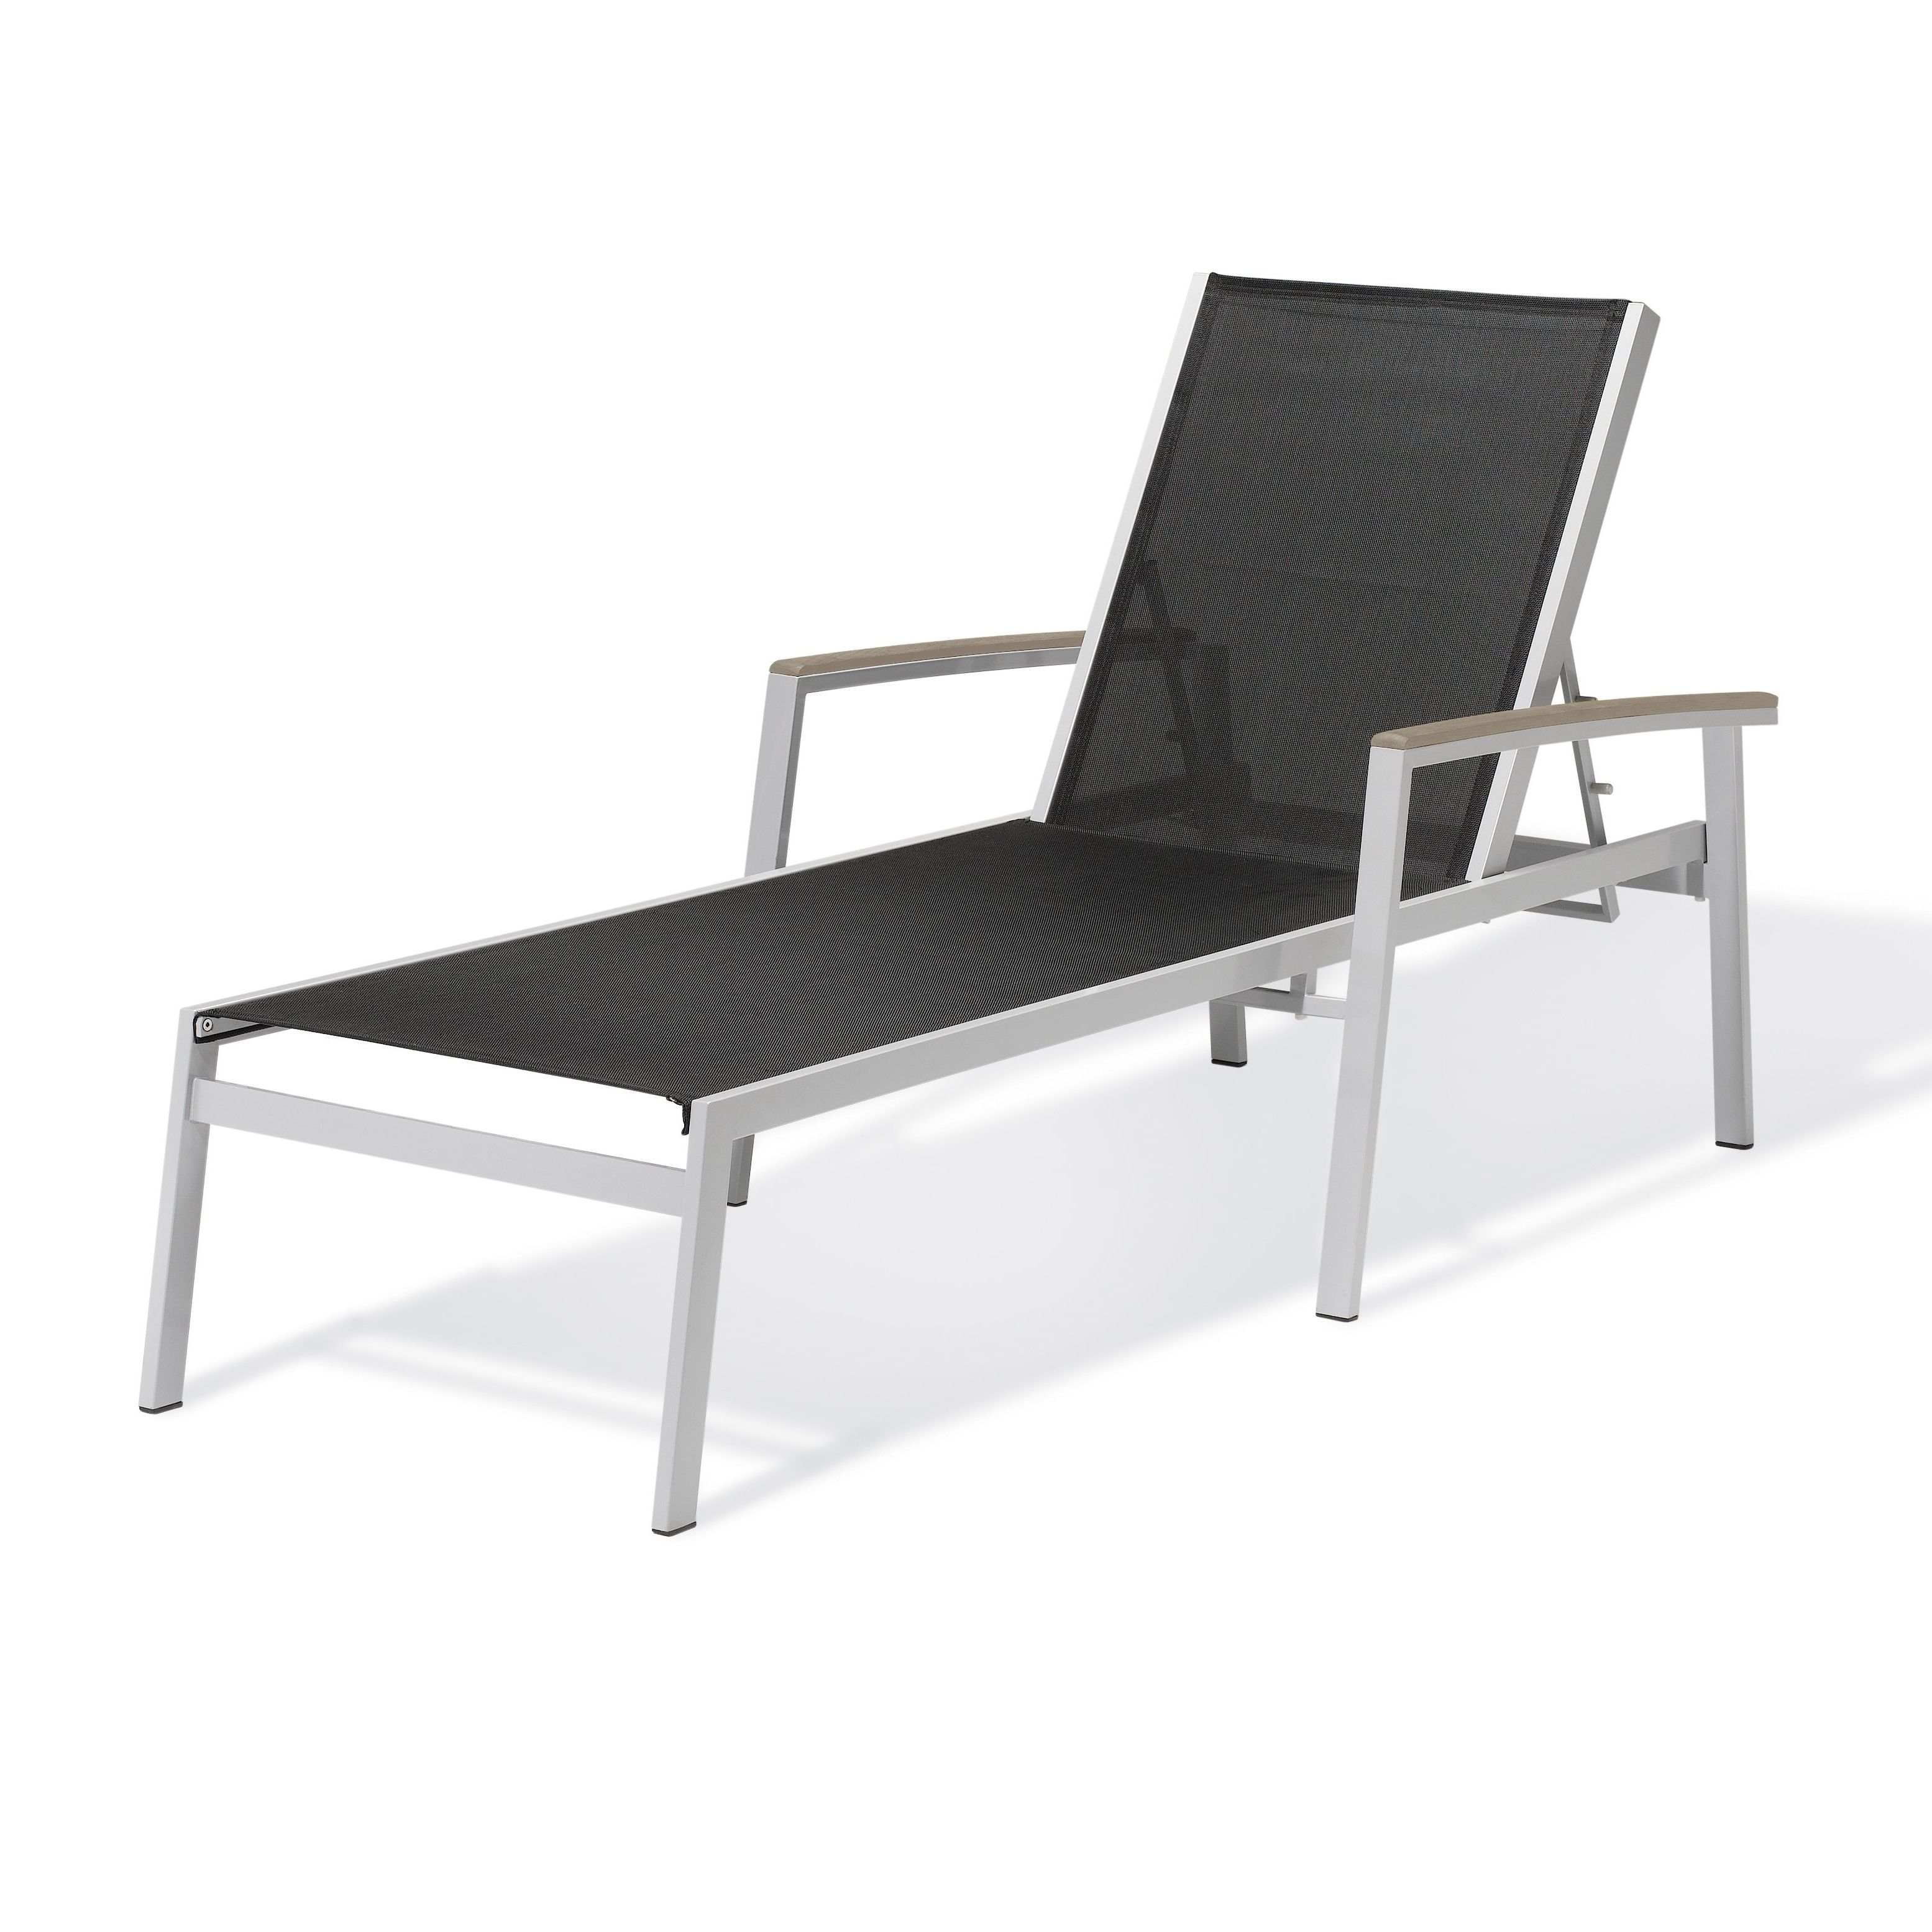 Hiteak Pearl Chaise Lounges In Black Mesh Fabric Regarding Most Recent Piscine Black Chaise Lounge (set Of 2) (View 4 of 25)